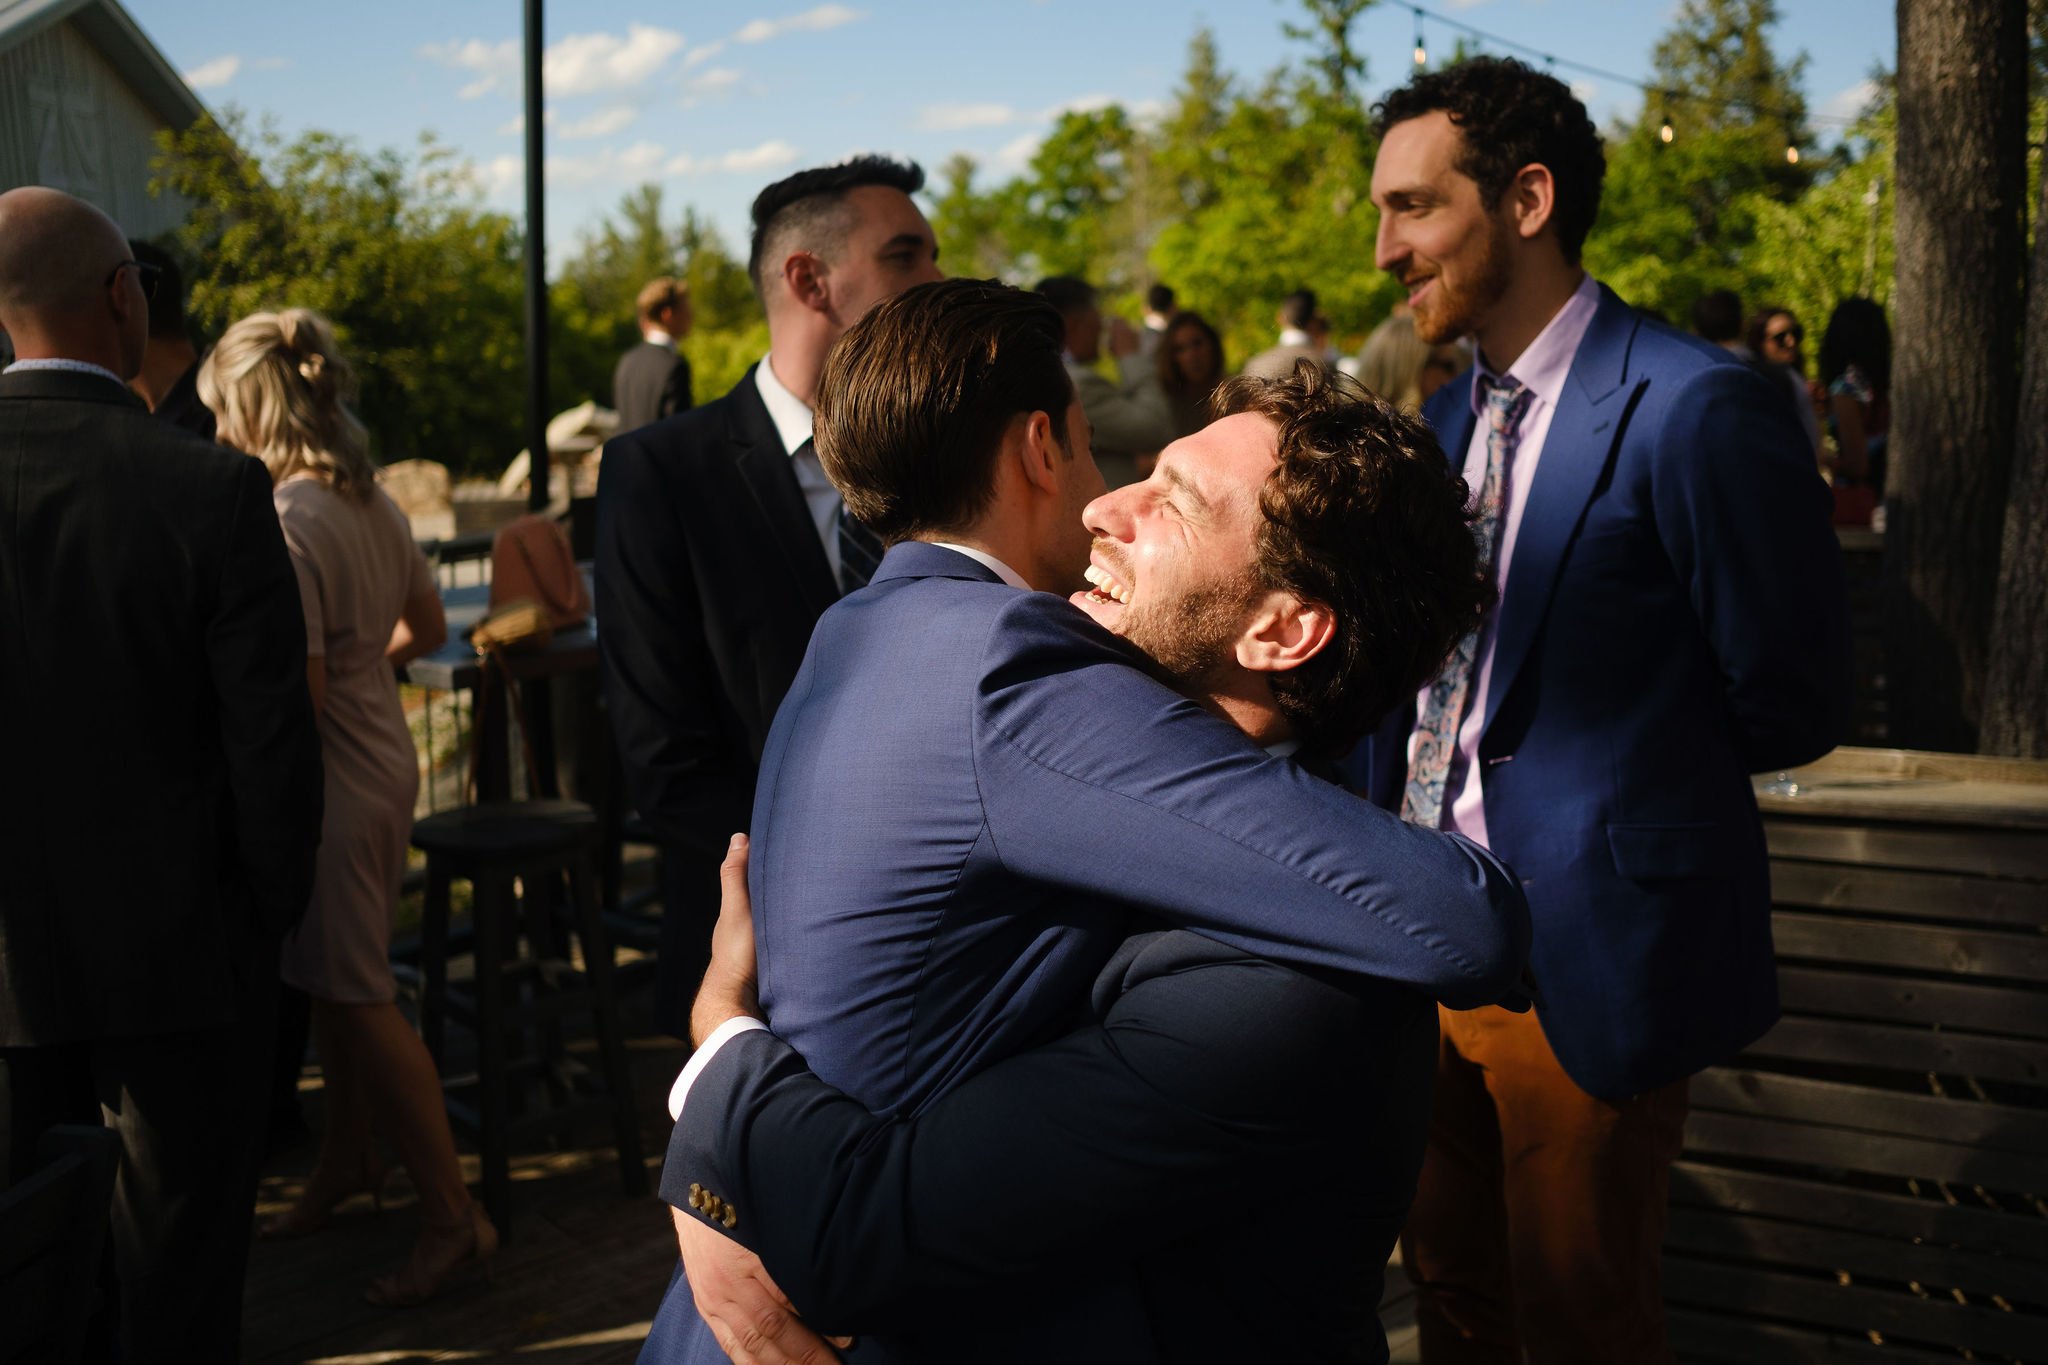  grooms friends give him a hug  